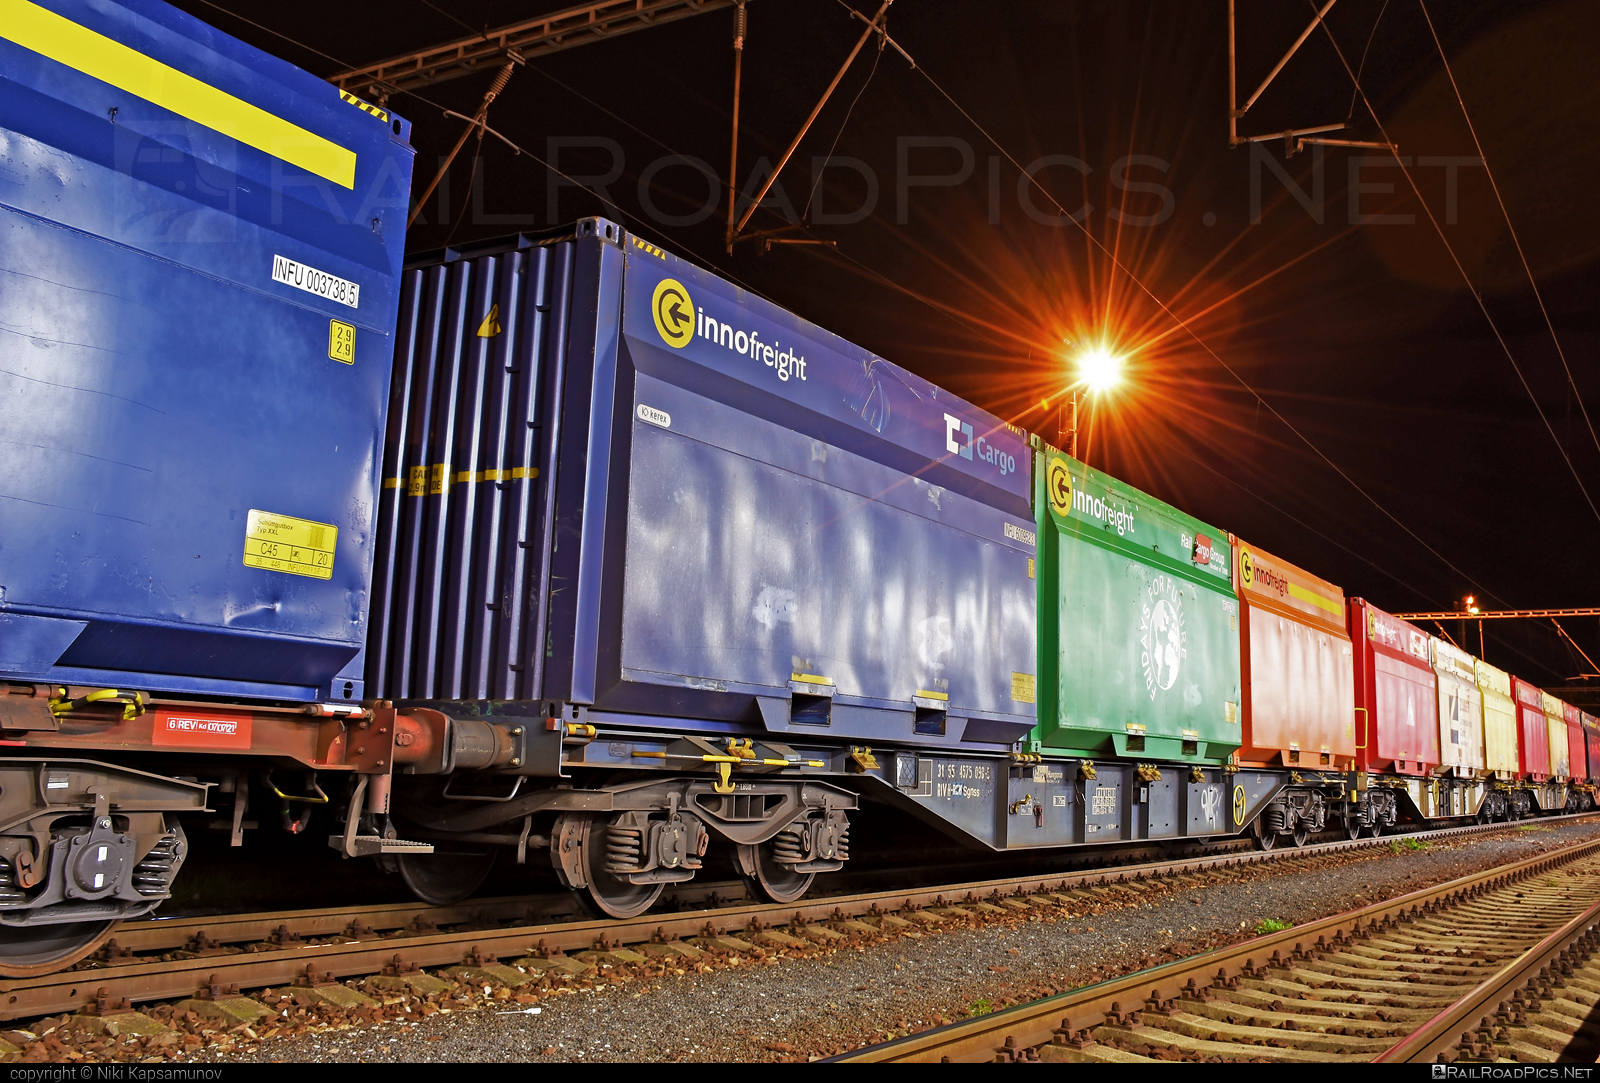 Class S - Sgnss - 4575 090-5 operated by Rail Cargo Hungaria ZRt. #container #flatwagon #innofreight #rcchu #rch #sgnss